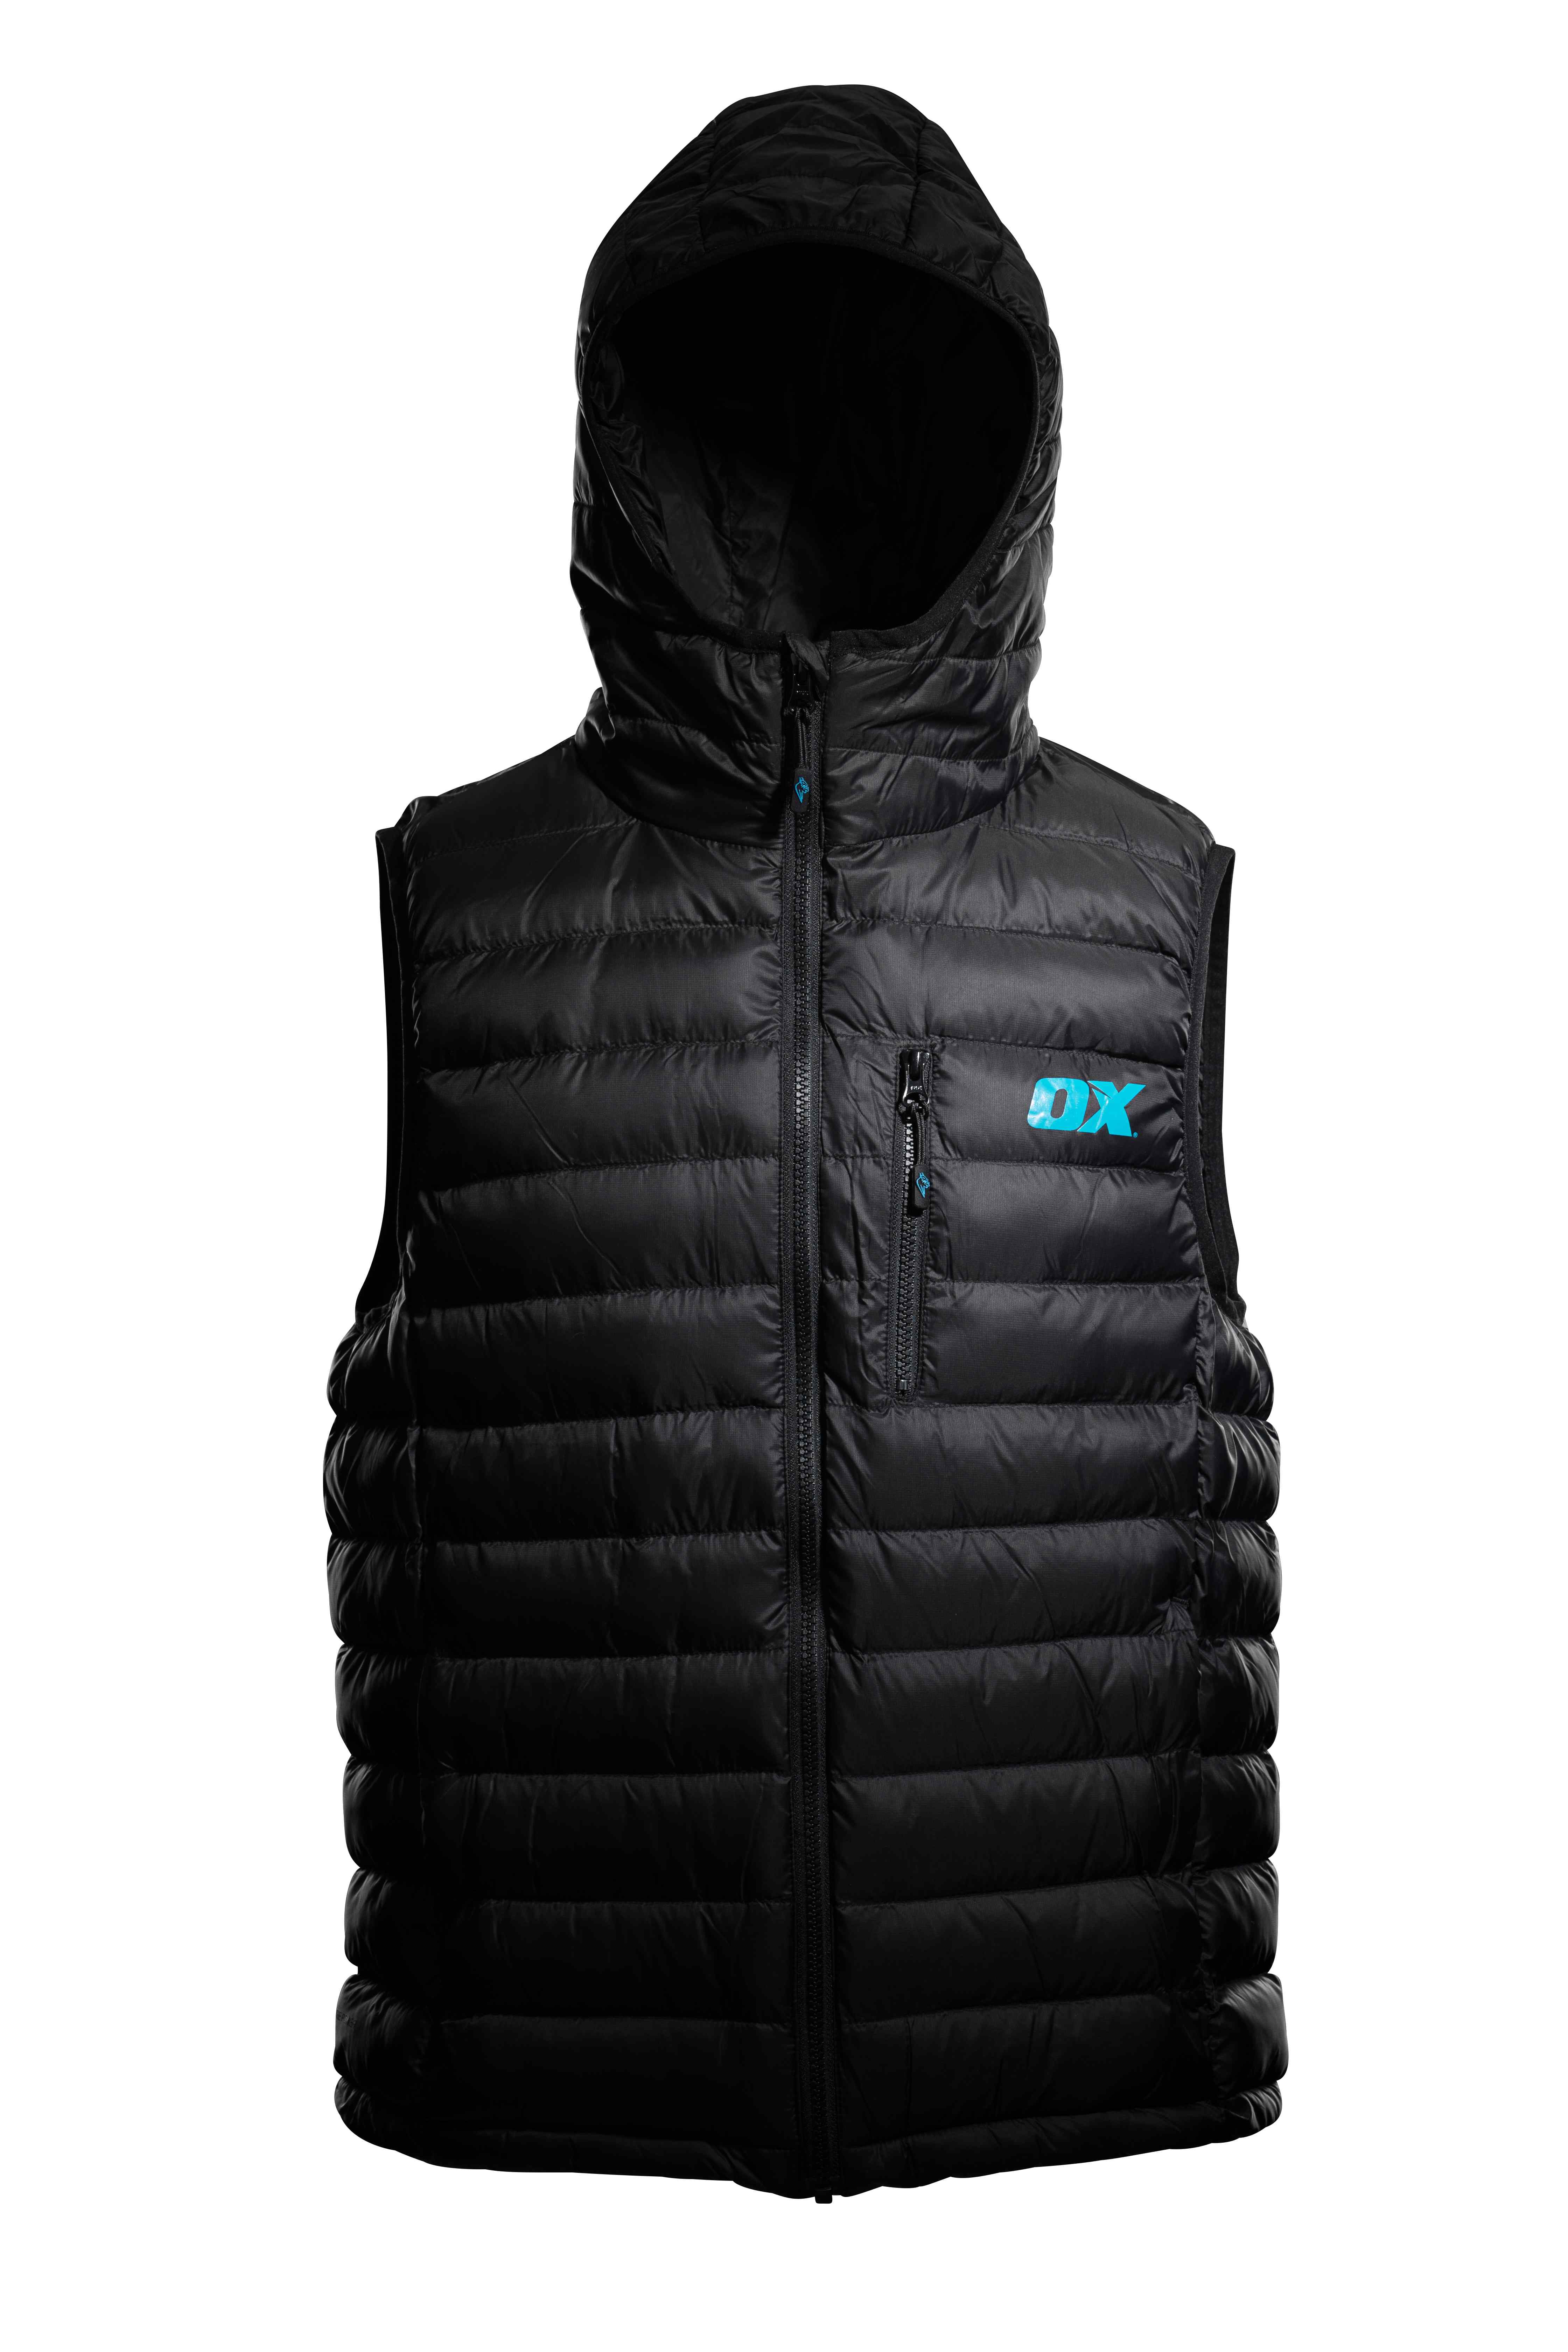 OX Ribbed Padded Gilet - M